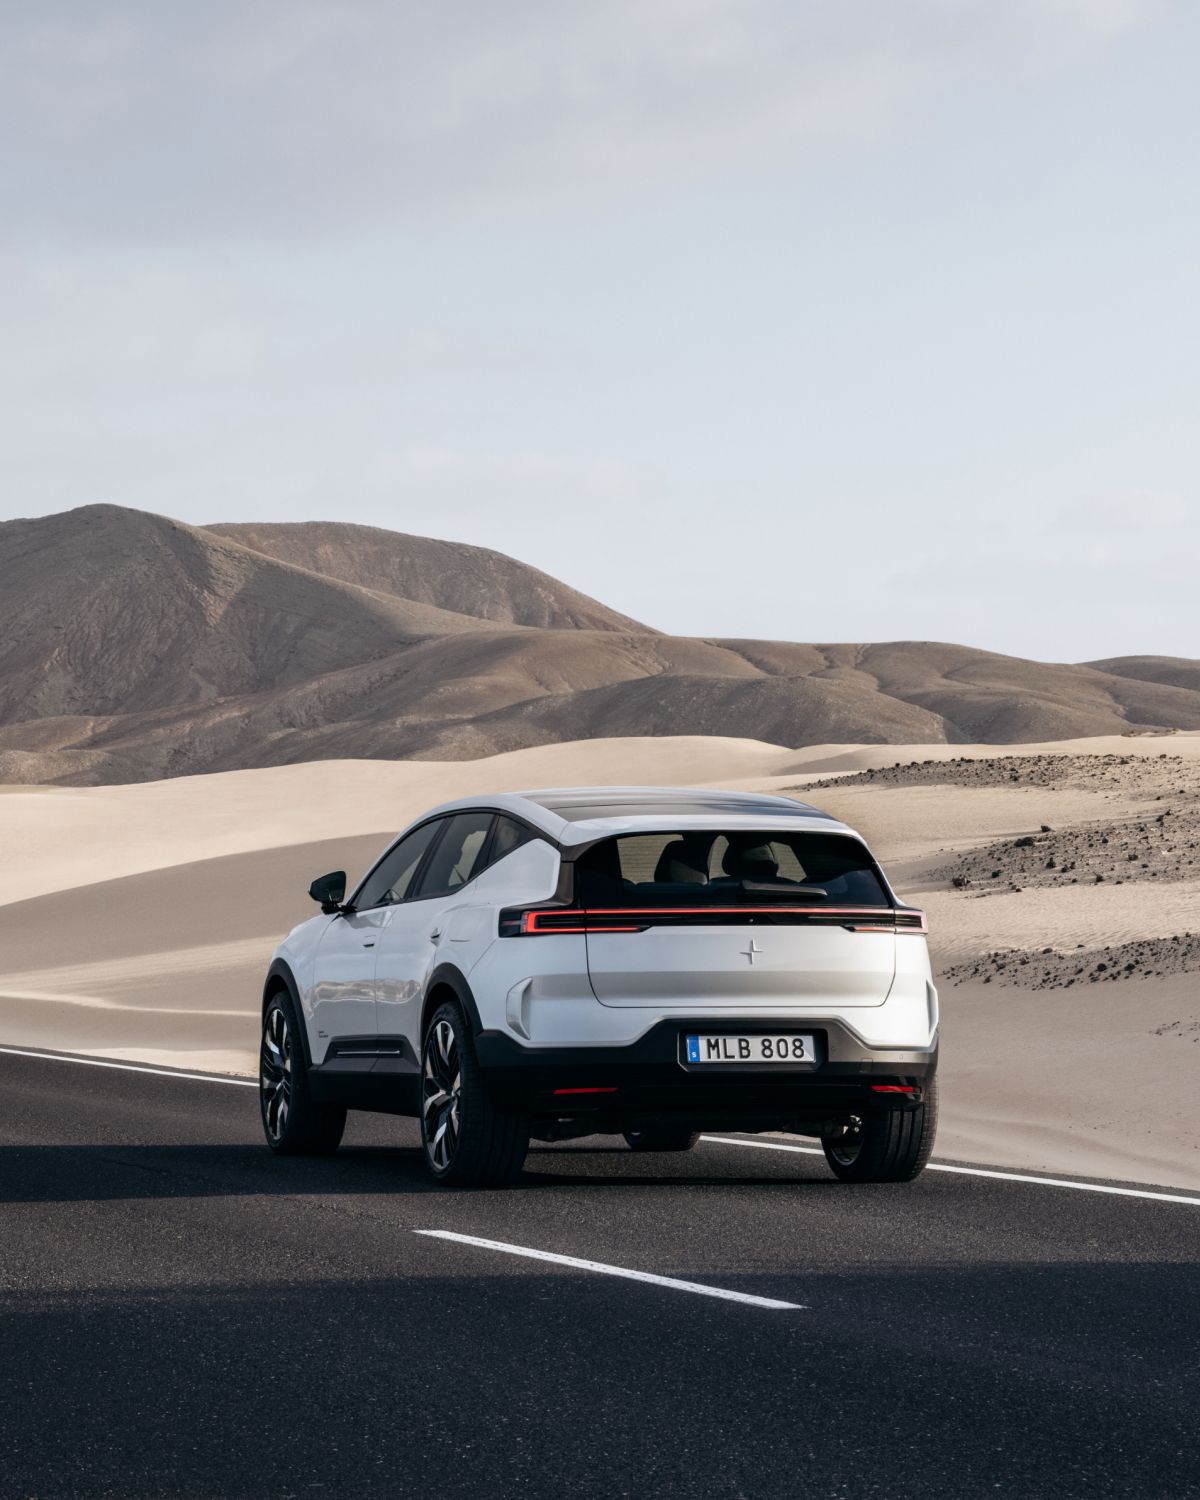 Back of Polestar 3, standing on a road in a desert looking environment.